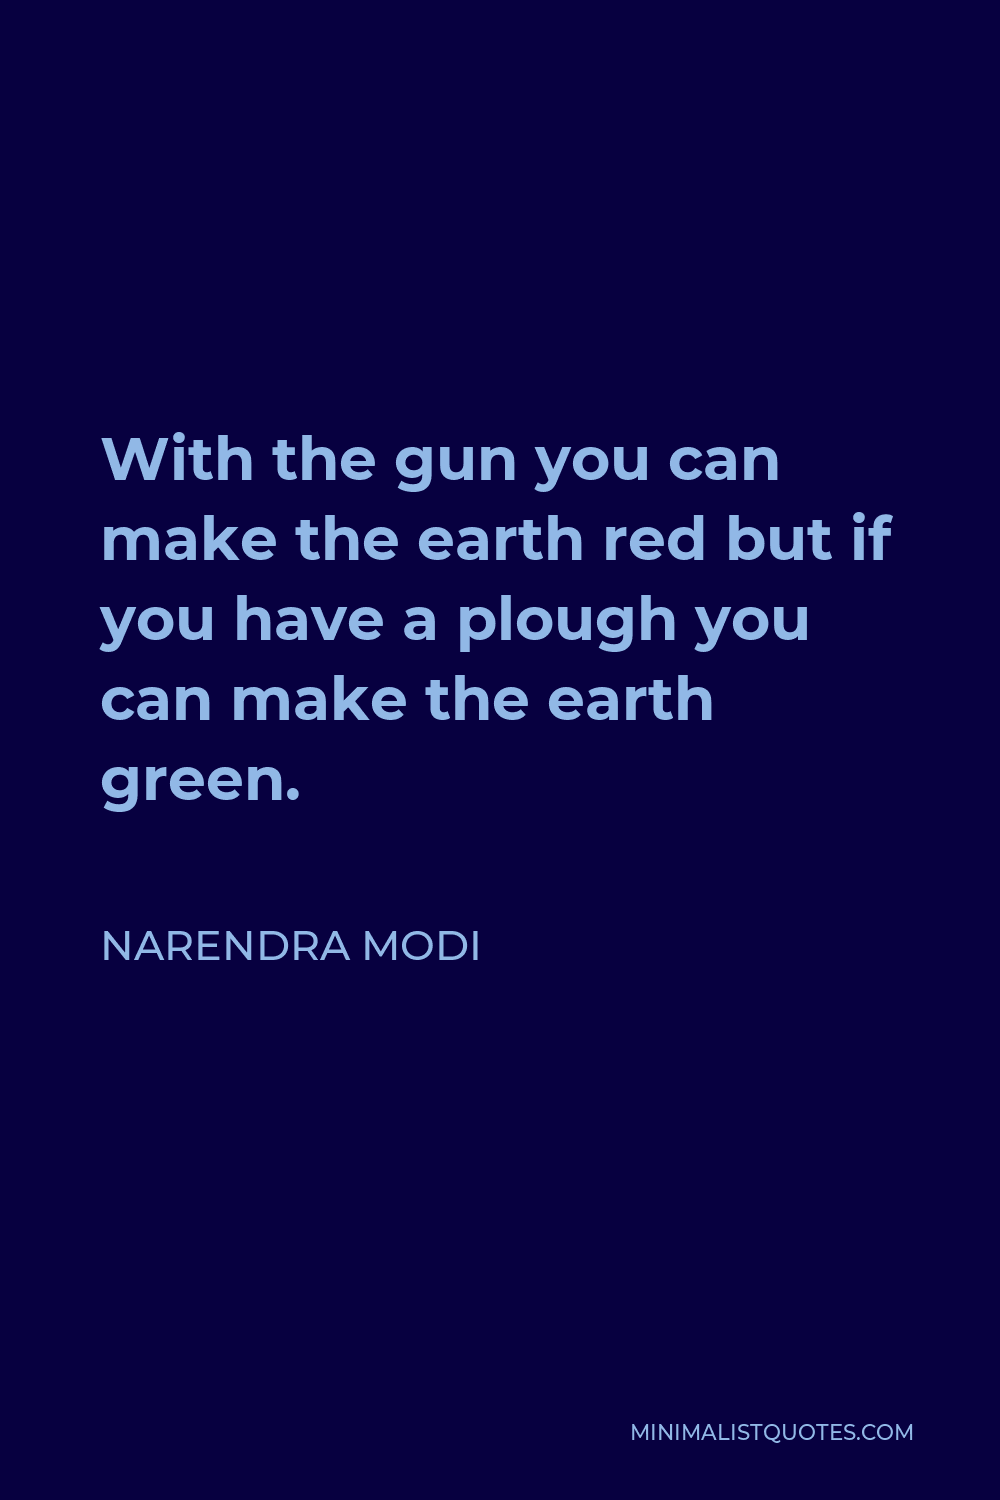 Narendra Modi Quote - With the gun you can make the earth red but if you have a plough you can make the earth green.